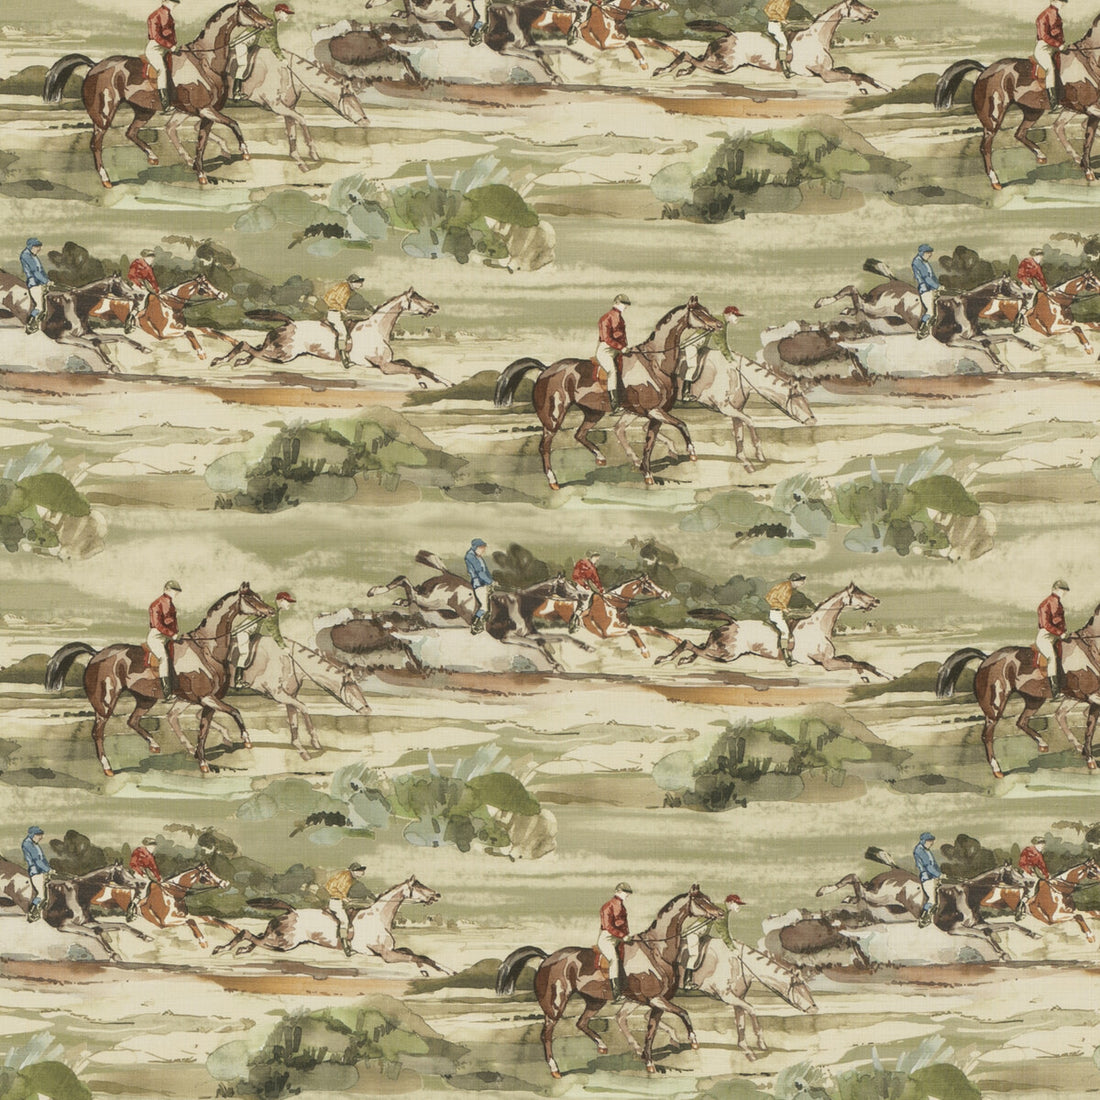 Morning Gallop Linen fabric in antique color - pattern FD294.J52.0 - by Mulberry in the Icons Fabrics collection